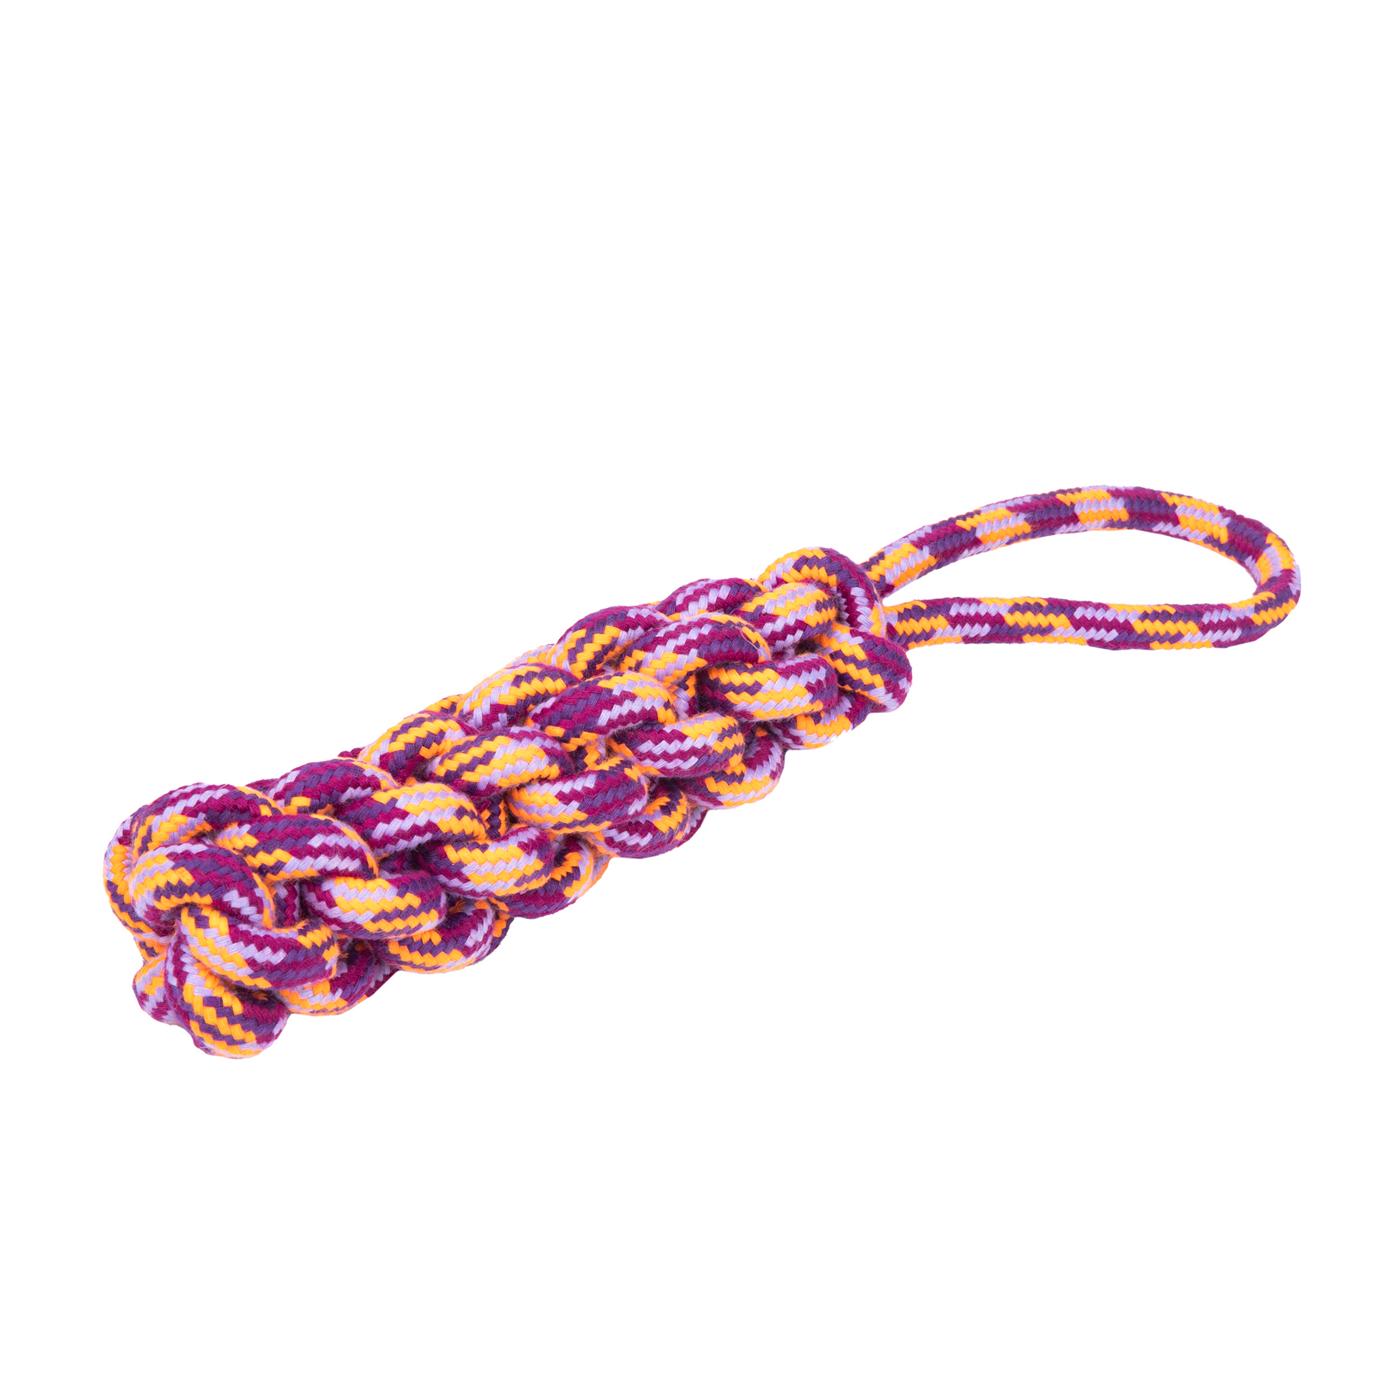 Woof & Whiskers Long Weaved Knot Rope Dog Toy; image 1 of 2